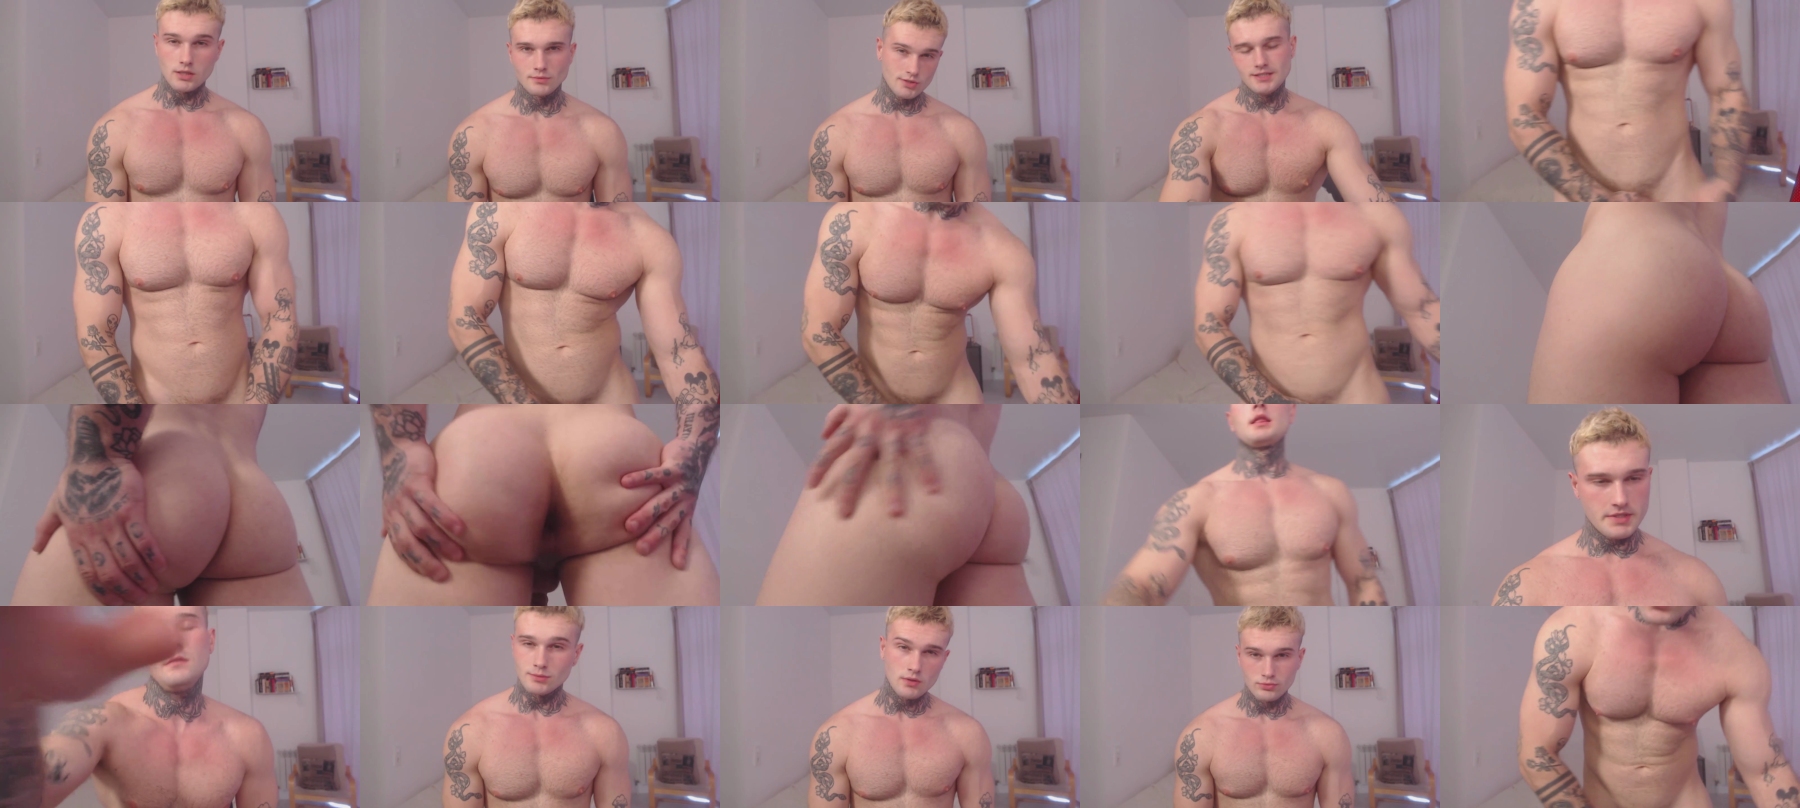 Andy_Hunk Video CAM SHOW @ Chaturbate 21-11-2021